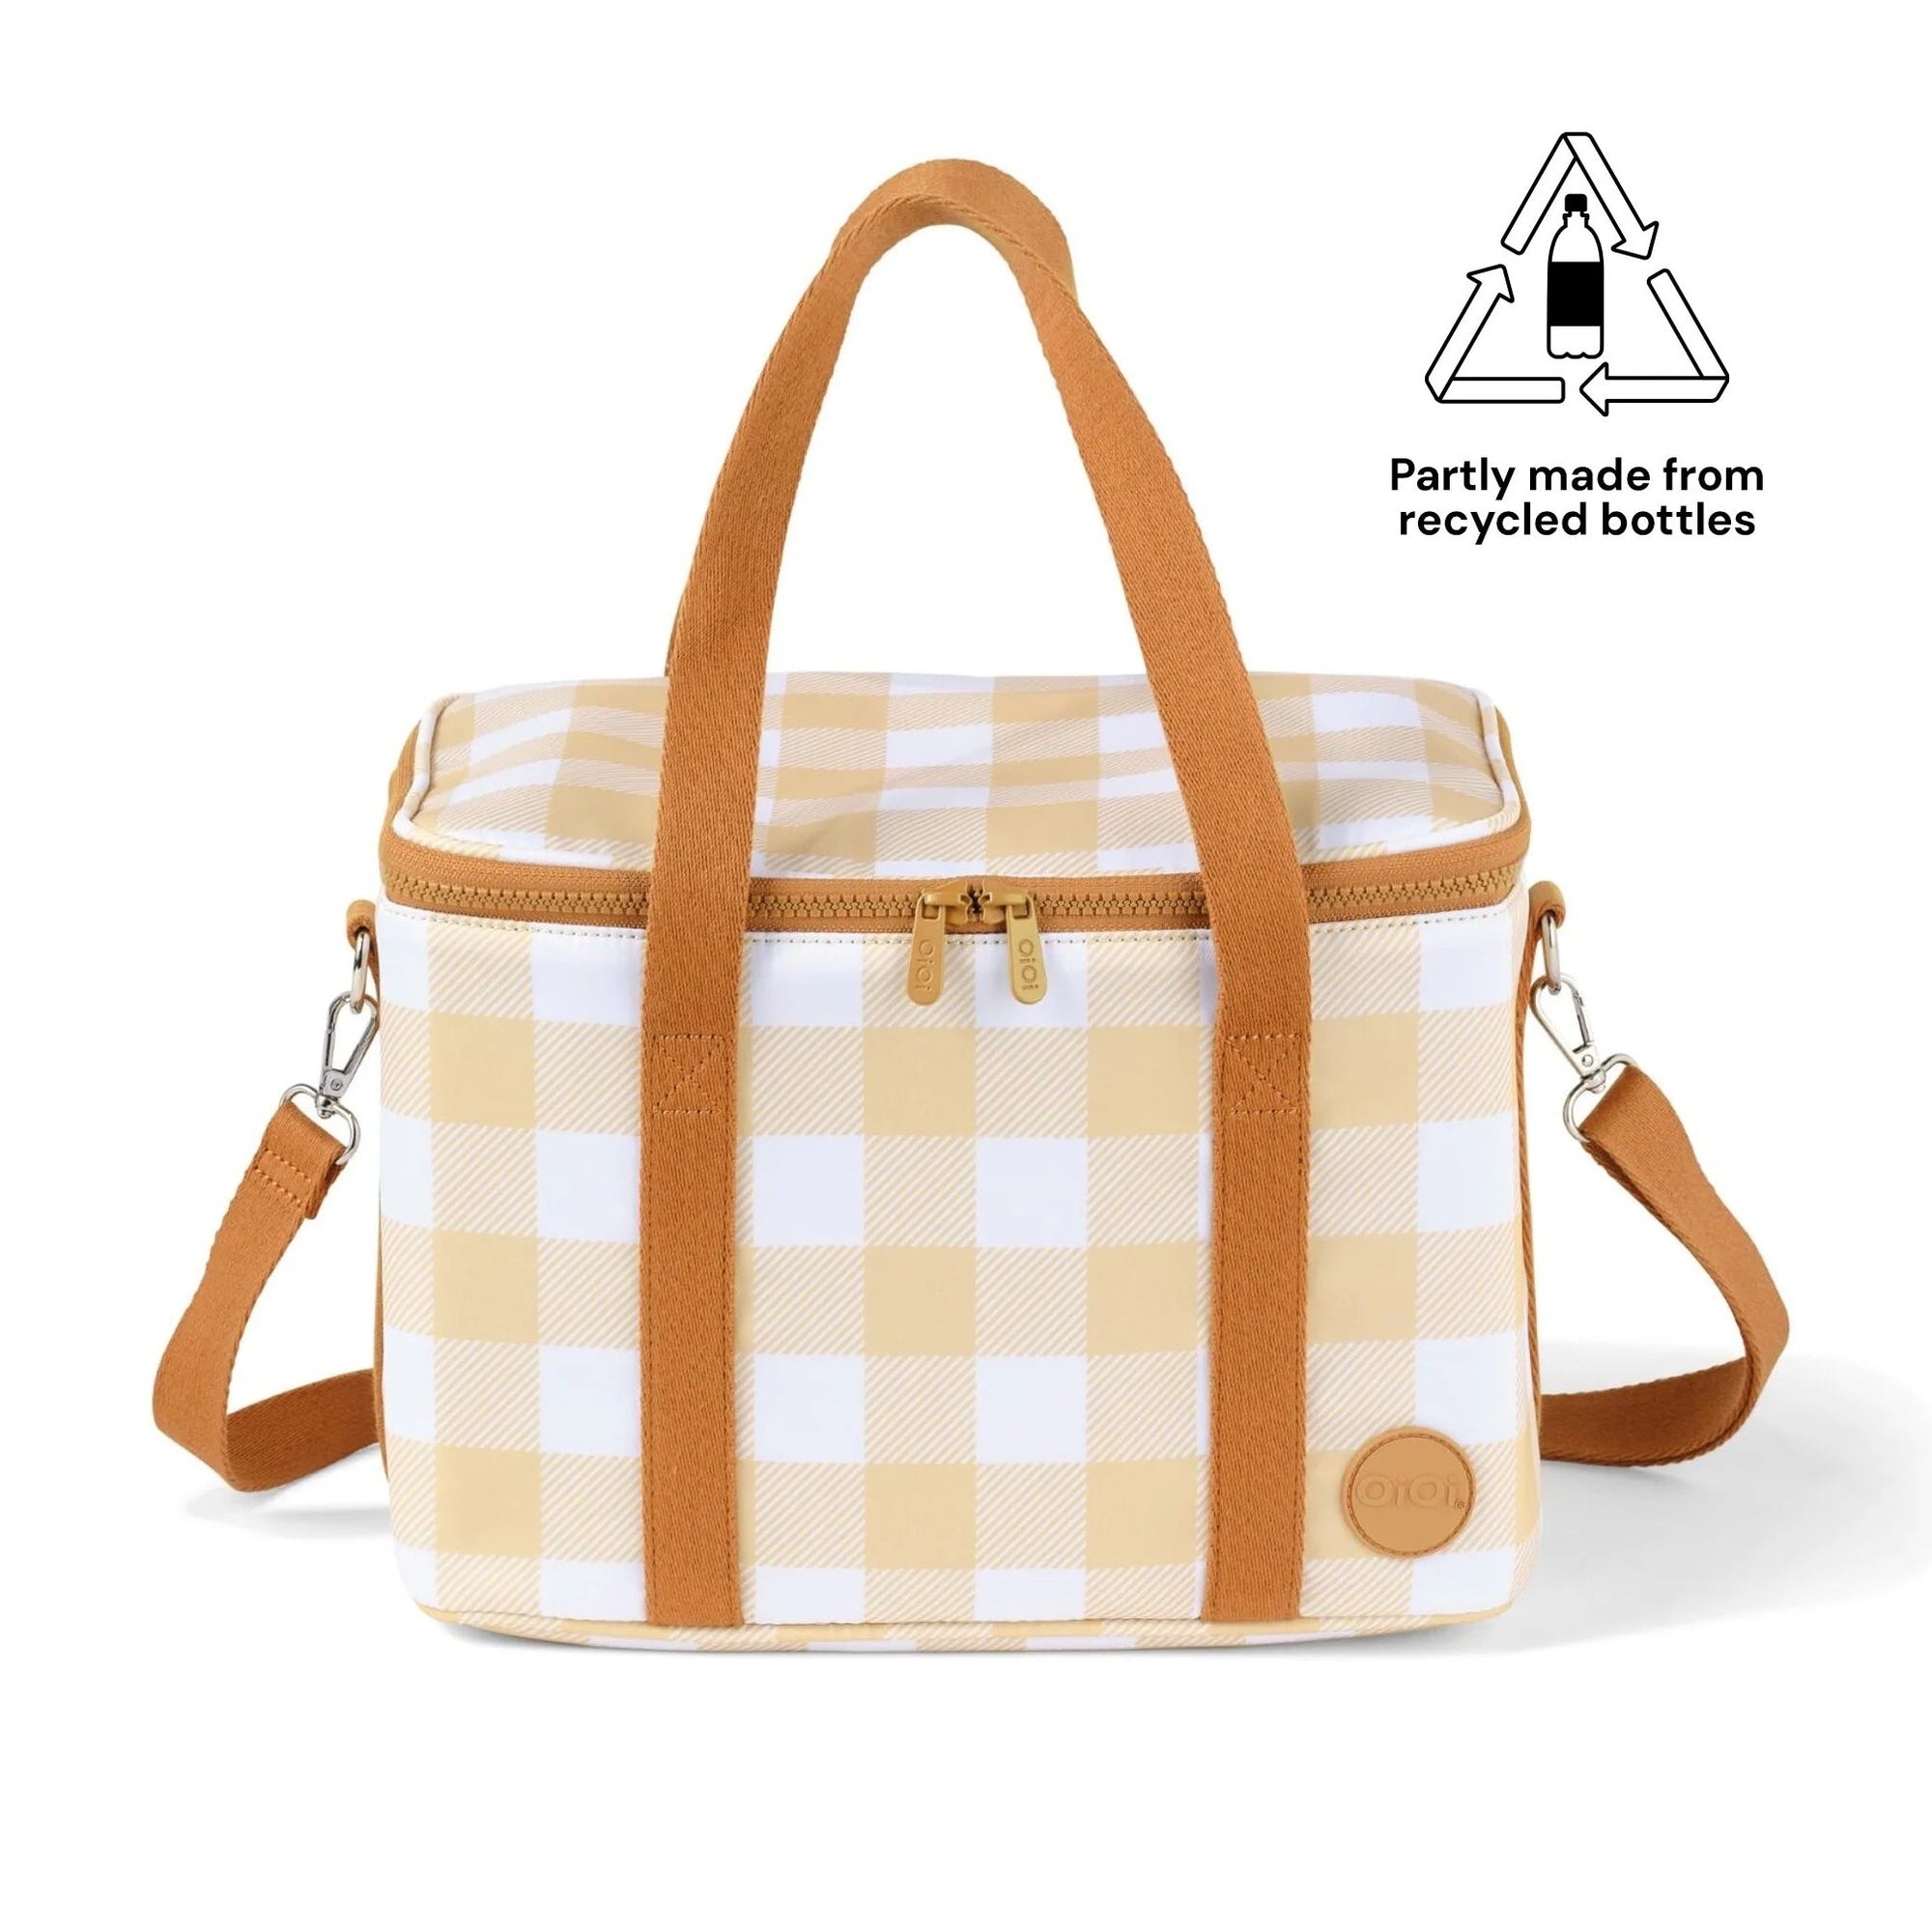 oioi maxi cooler bag - angus and dudley